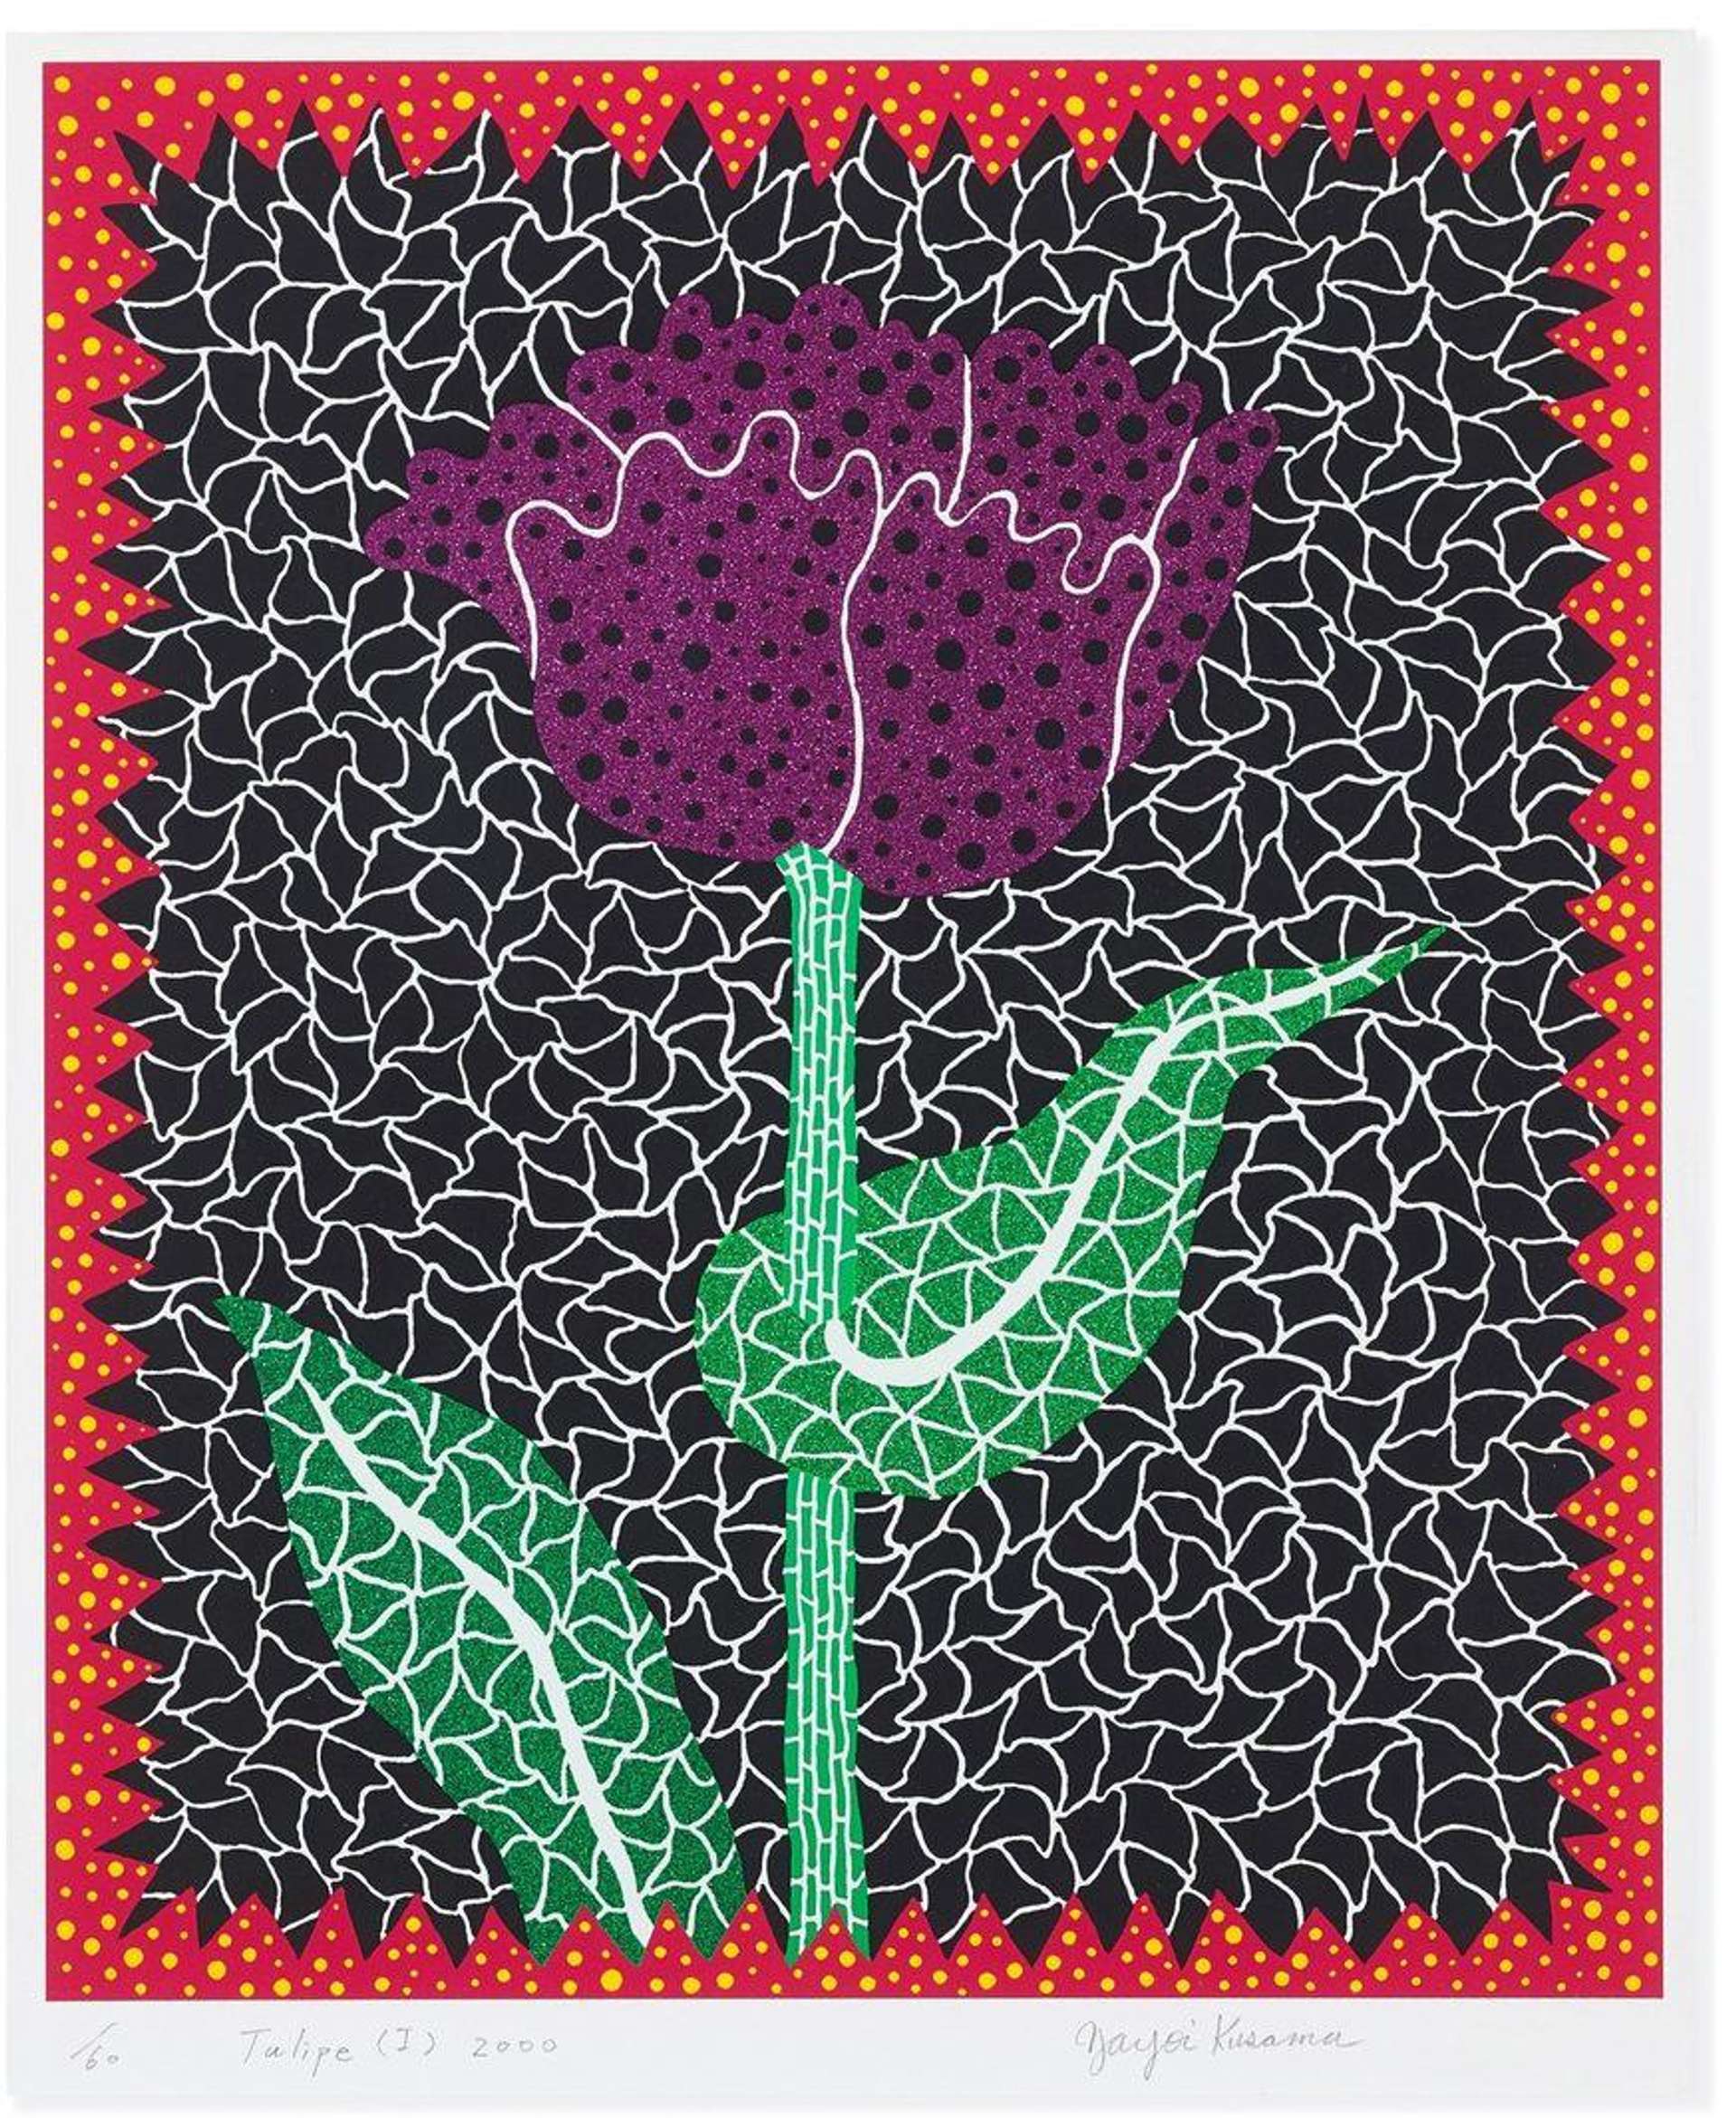 Purple tulip flower against black background with white geometric lines, with a red border that has yellow dots. 